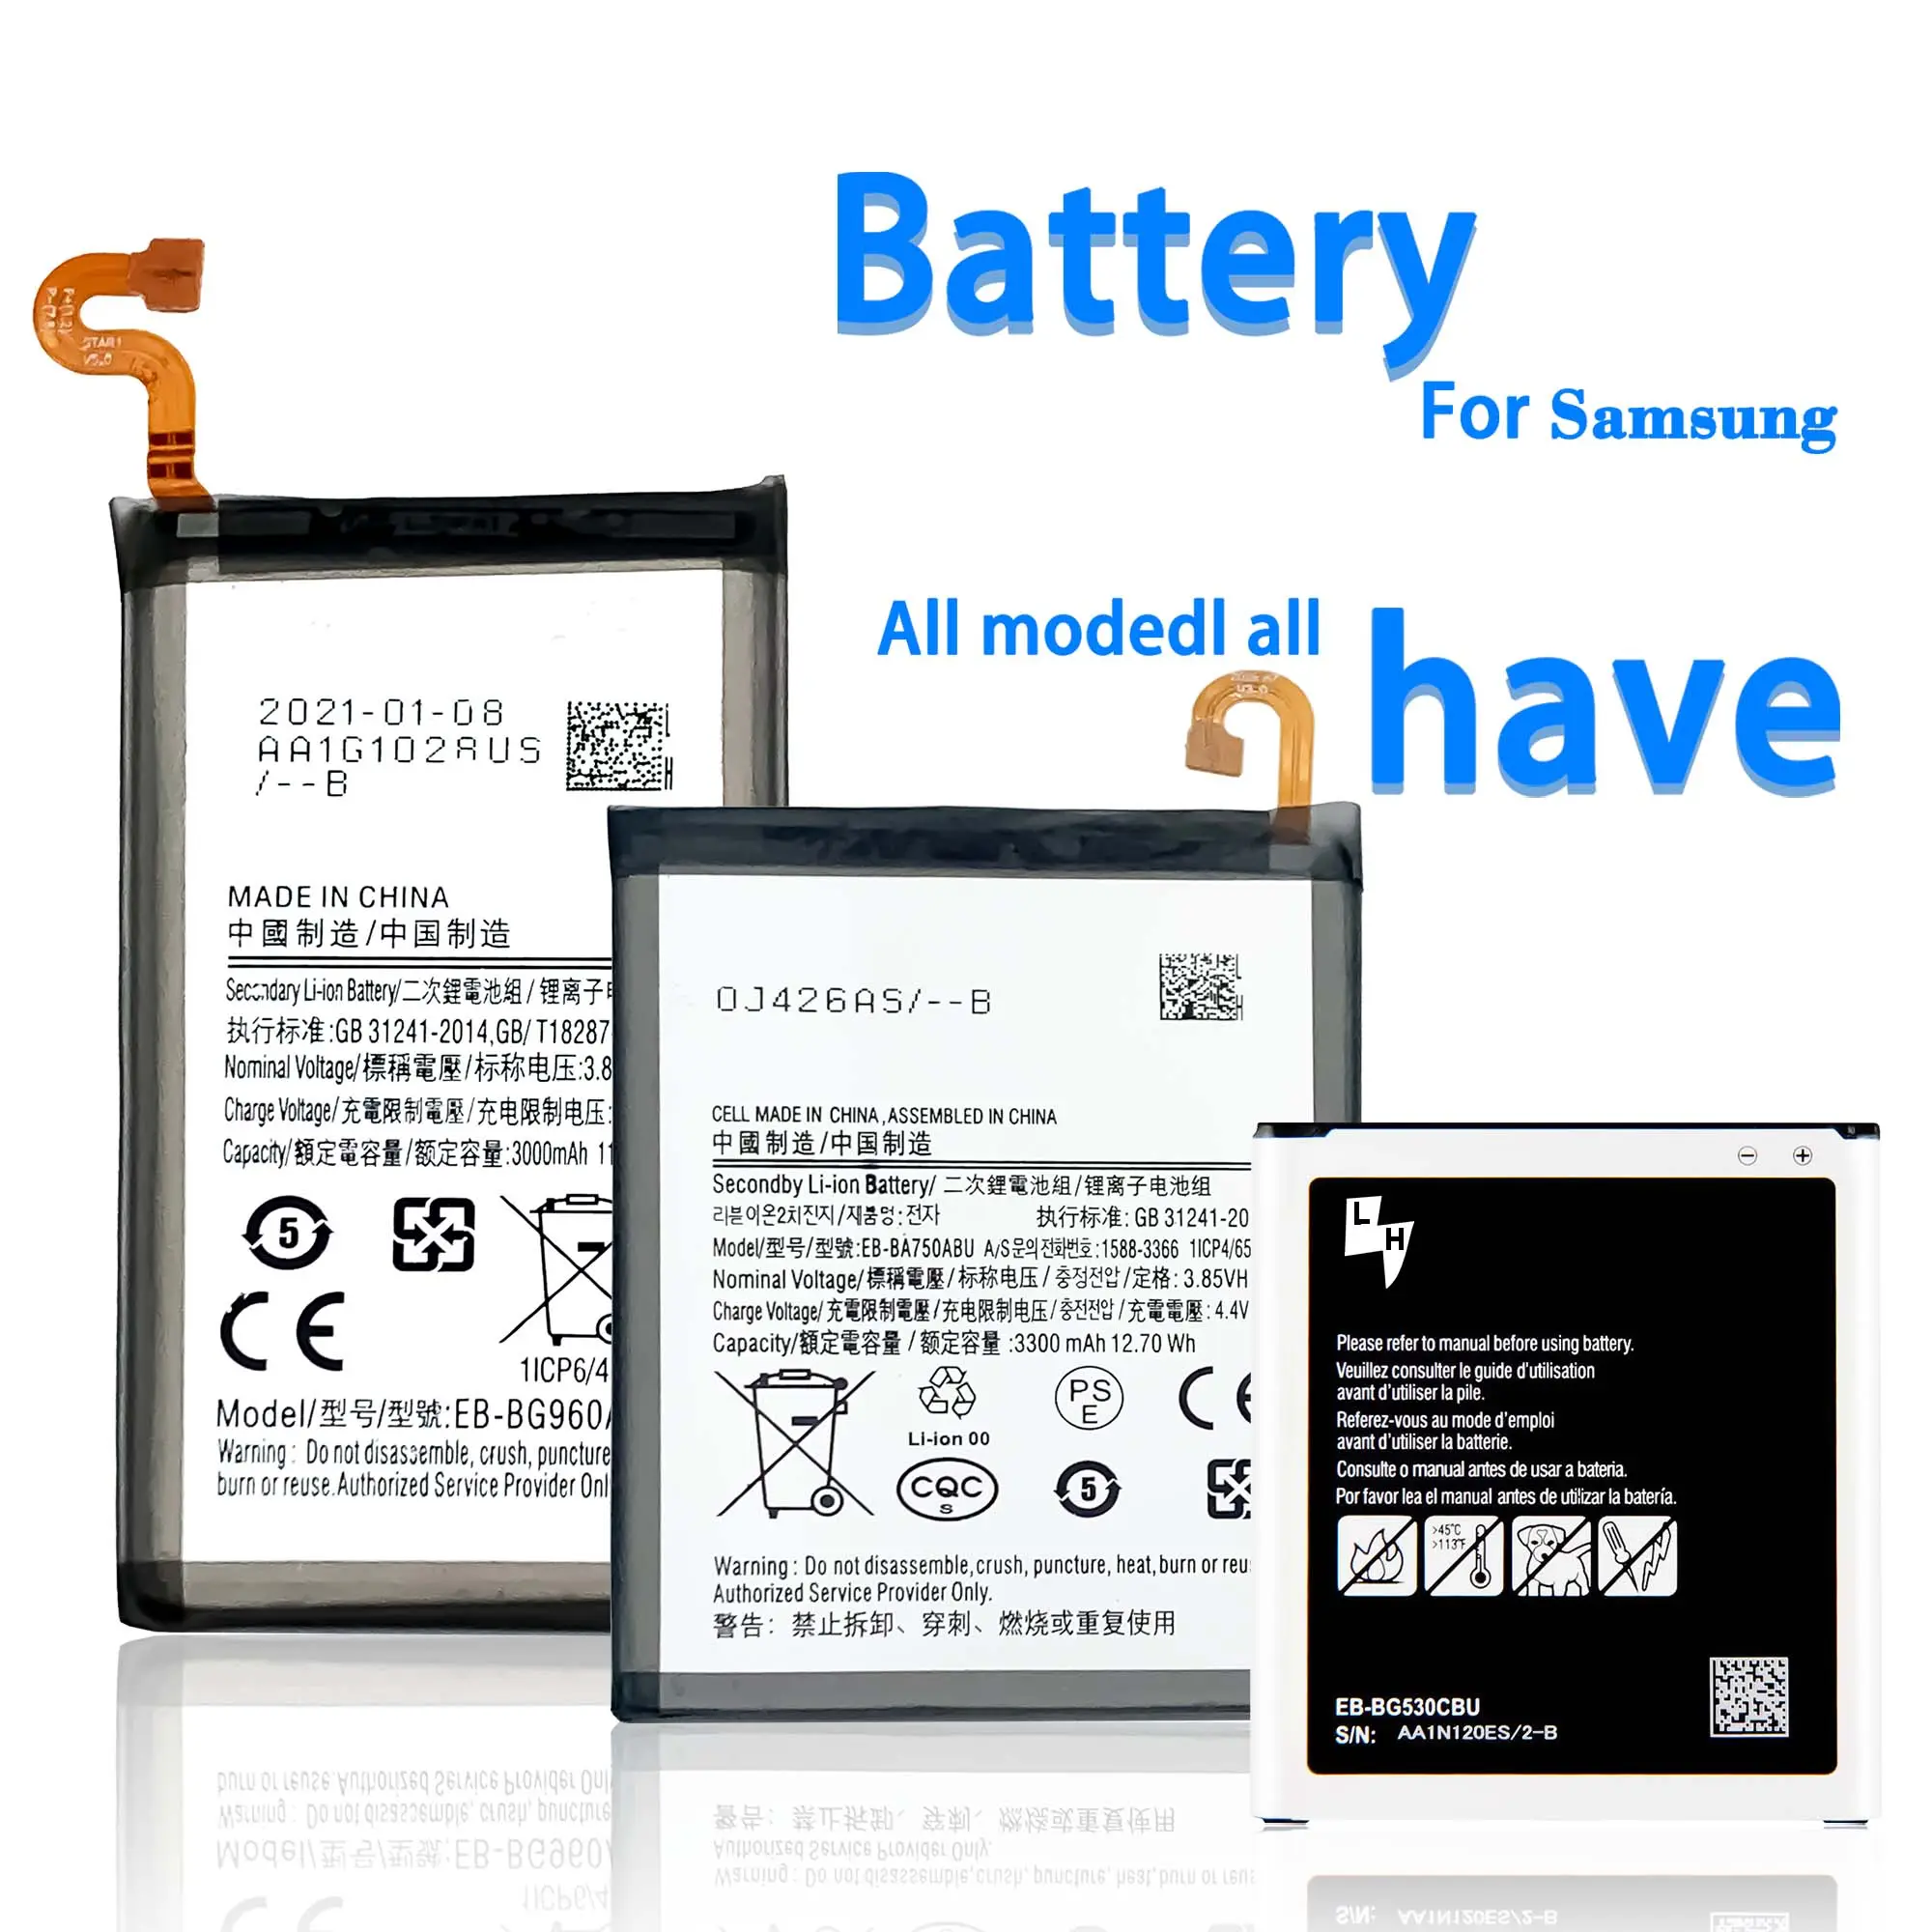 Factory direct battery for samsung A10 A20 A30 A50 A70 batterie replacement for Samsung all models phone battery manufacturer